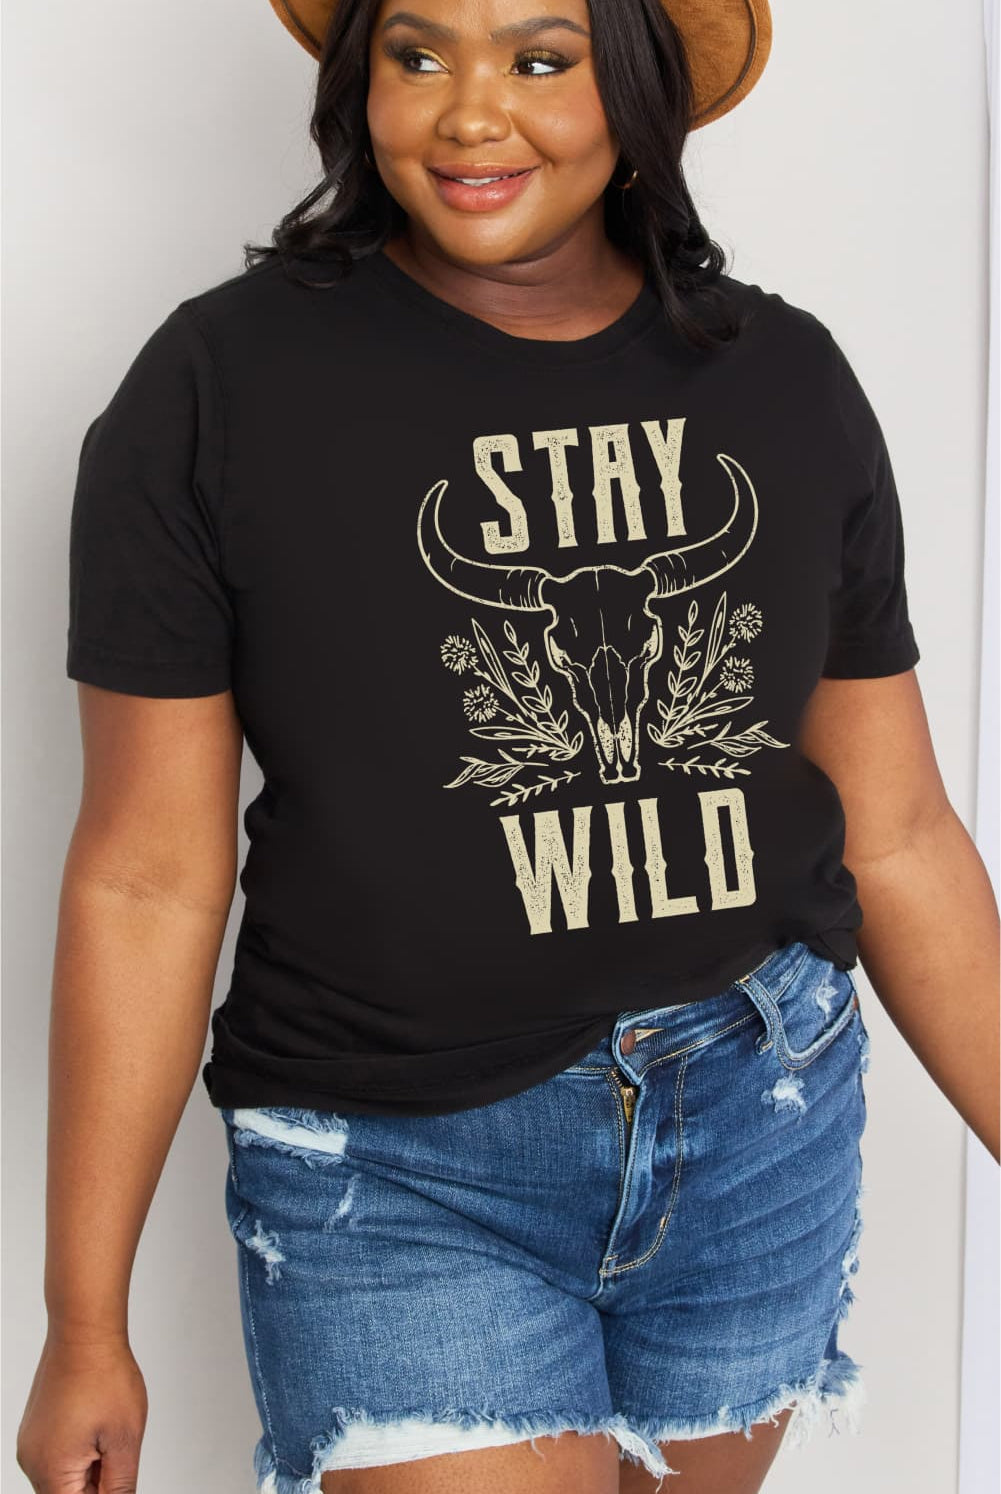 Gray Simply Love Full Size STAY WILD Graphic Cotton Tee Tops